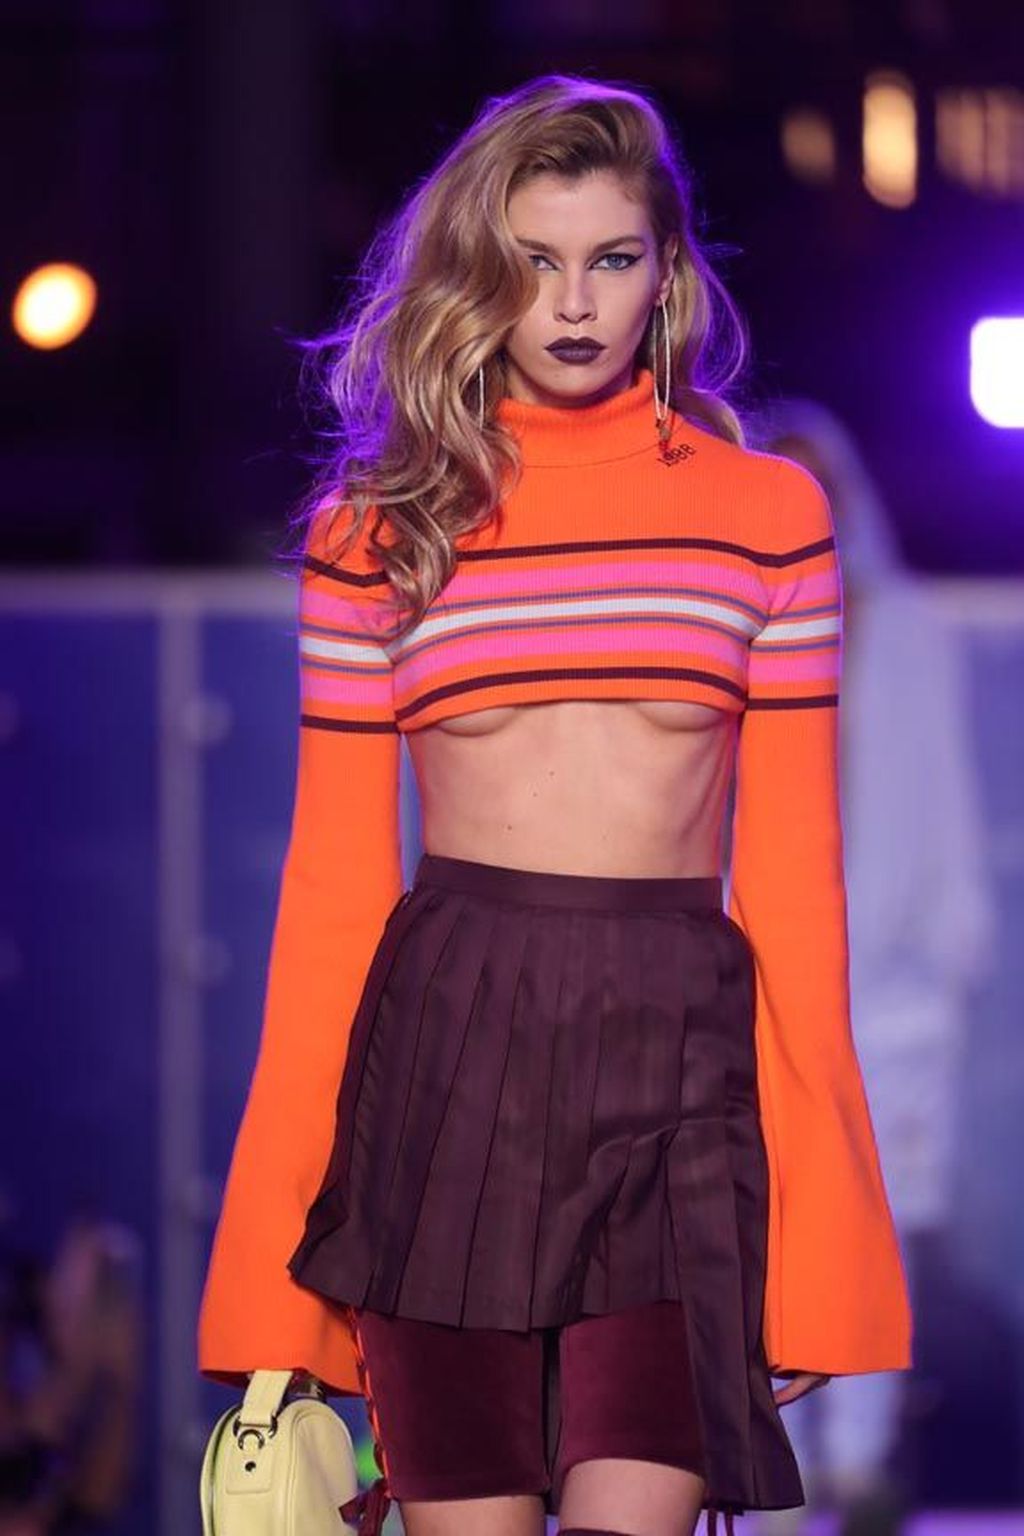 Is Underboob the New Cleavage? Introducing the Extreme Crop Top